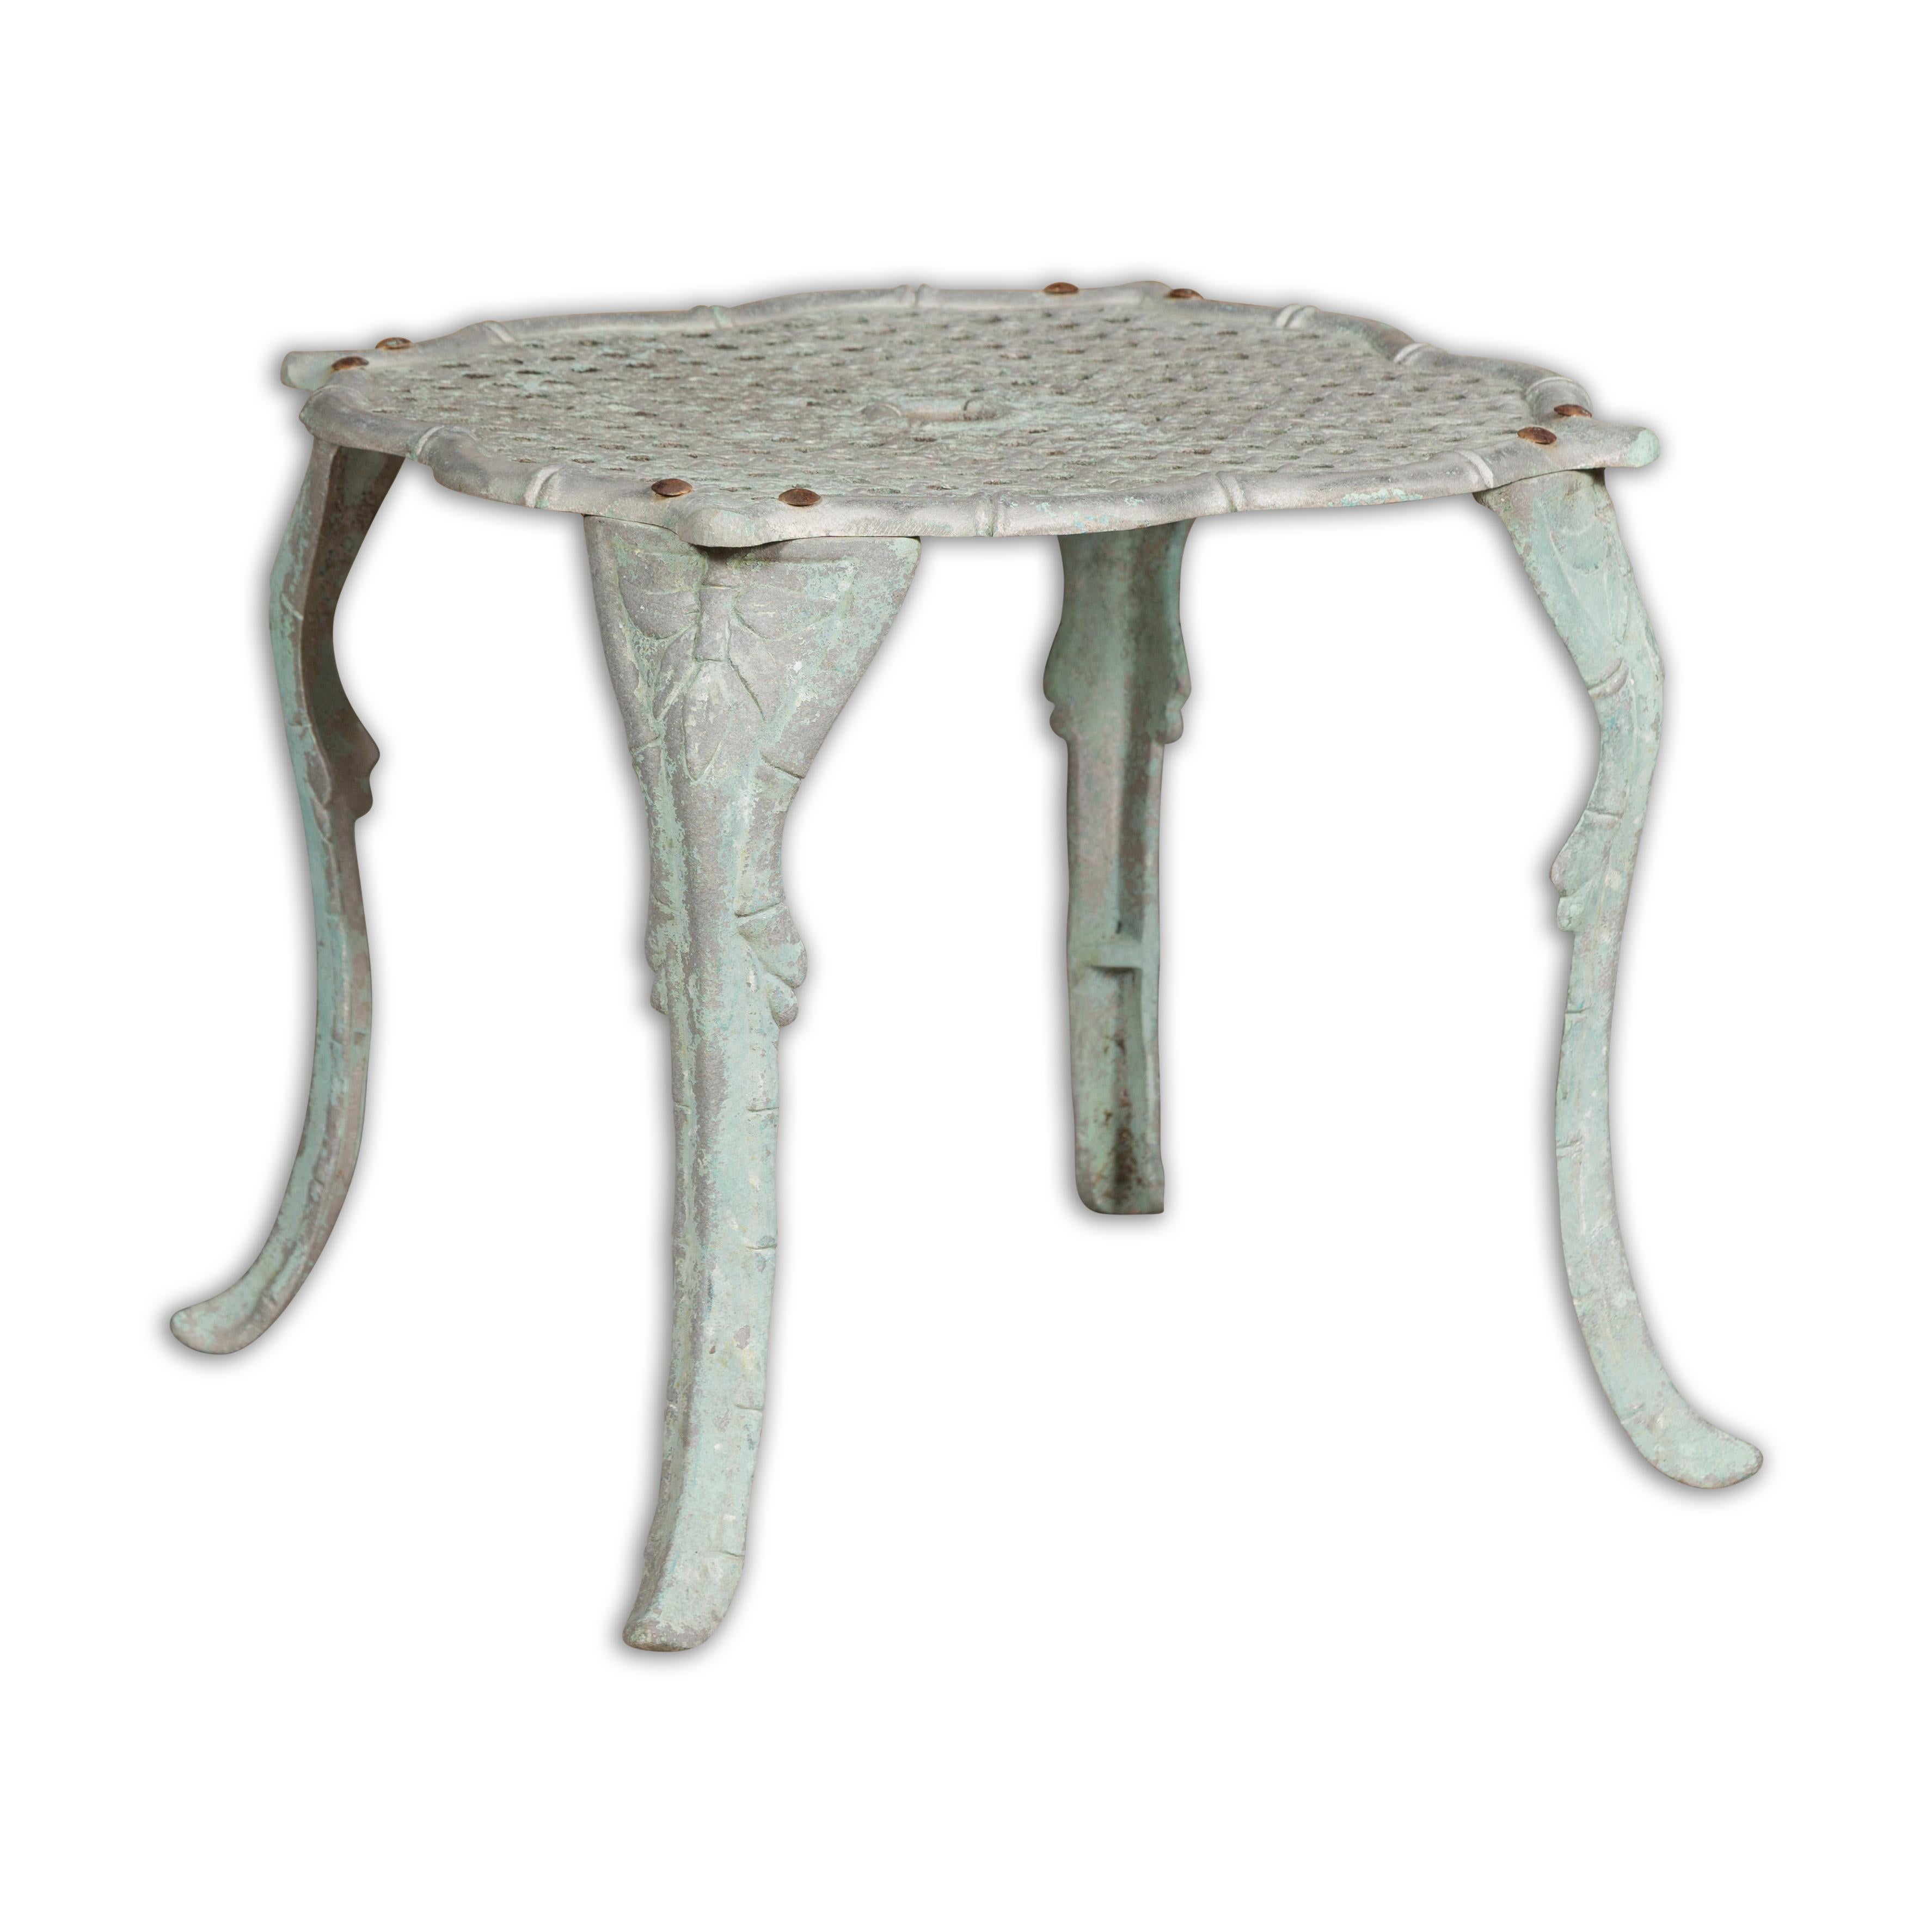 A French painted metal low side table from the Midcentury period, with blue green finish, wicker inspired top and cabriole legs. This French Midcentury side table is a delightful blend of whimsy and elegance. Crafted from painted metal, it exudes a